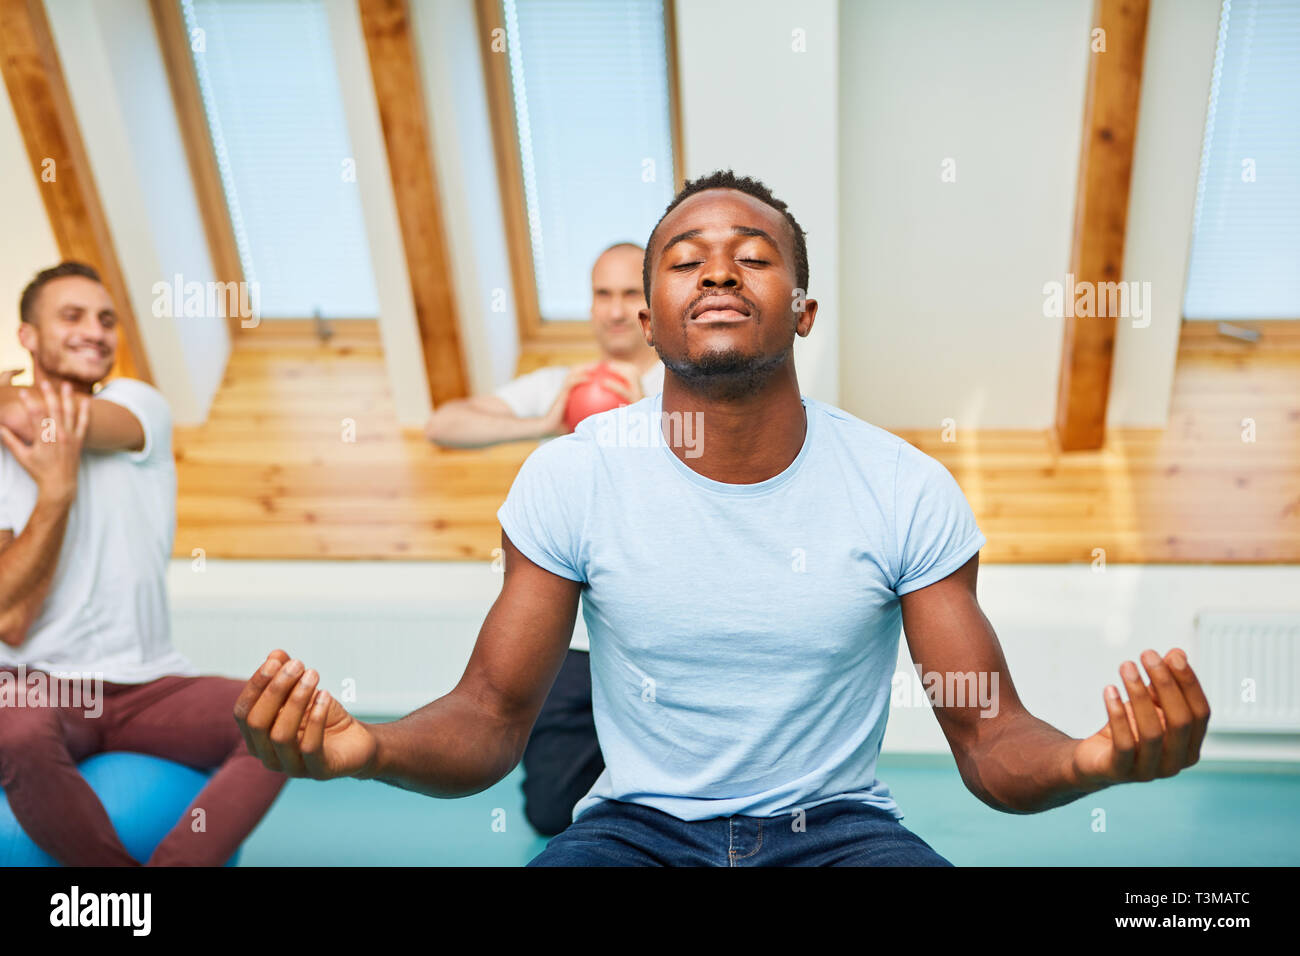 African man doing a breathing exercise while doing yoga for rest and relaxation Stock Photo